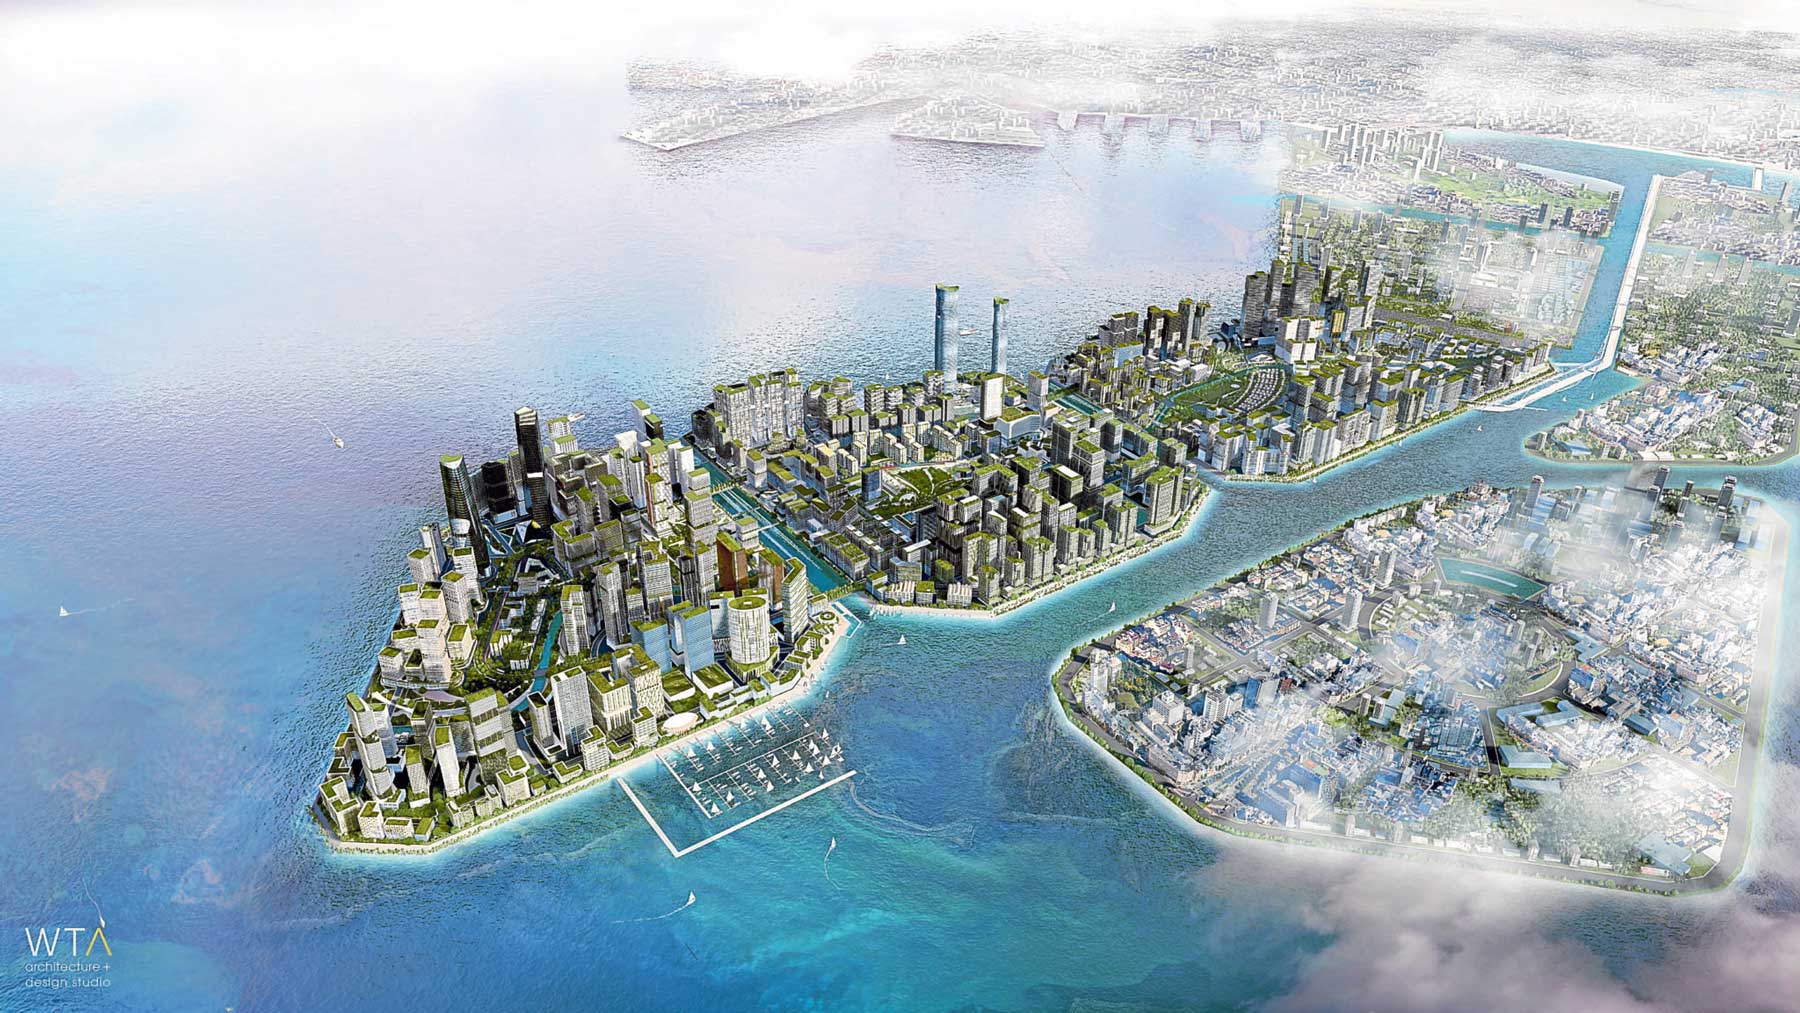 The three islands of the 419 hectare Horizon Manila project is planned to encompass a vast diversity of communities that all function together as a complete city